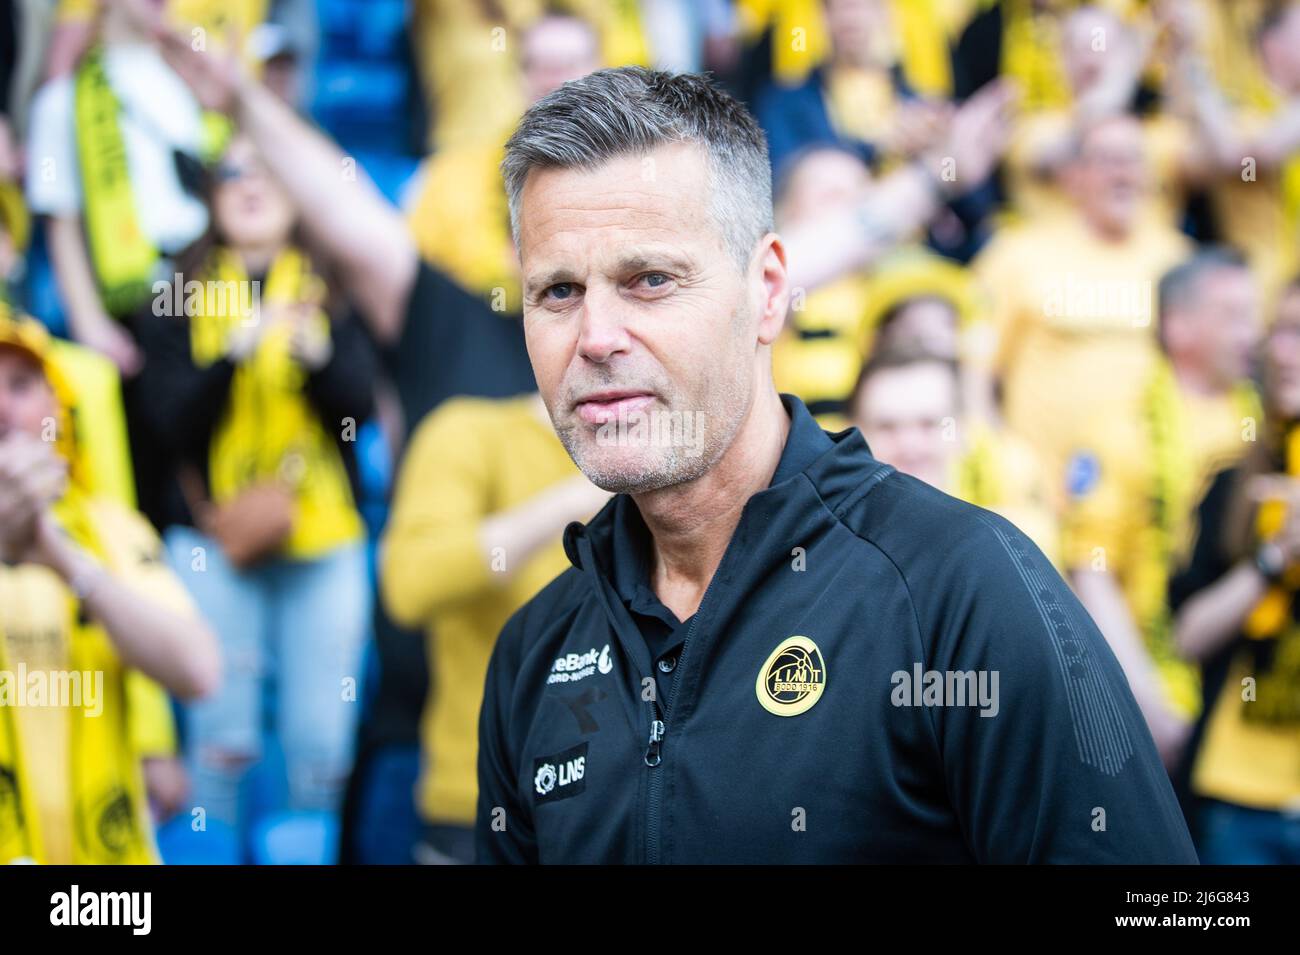 Oslo, Norway. 01st, May 2022. Head coach Kjetil Knutsen of Bodoe/Glimt seen before the Norwegian Cup final, the NM Menn final, between Bodoe/Glimt and Molde at Ullevaal Stadion in Oslo. (Photo credit: Gonzales Photo - Jan-Erik Eriksen). Credit: Gonzales Photo/Alamy Live News Stock Photo